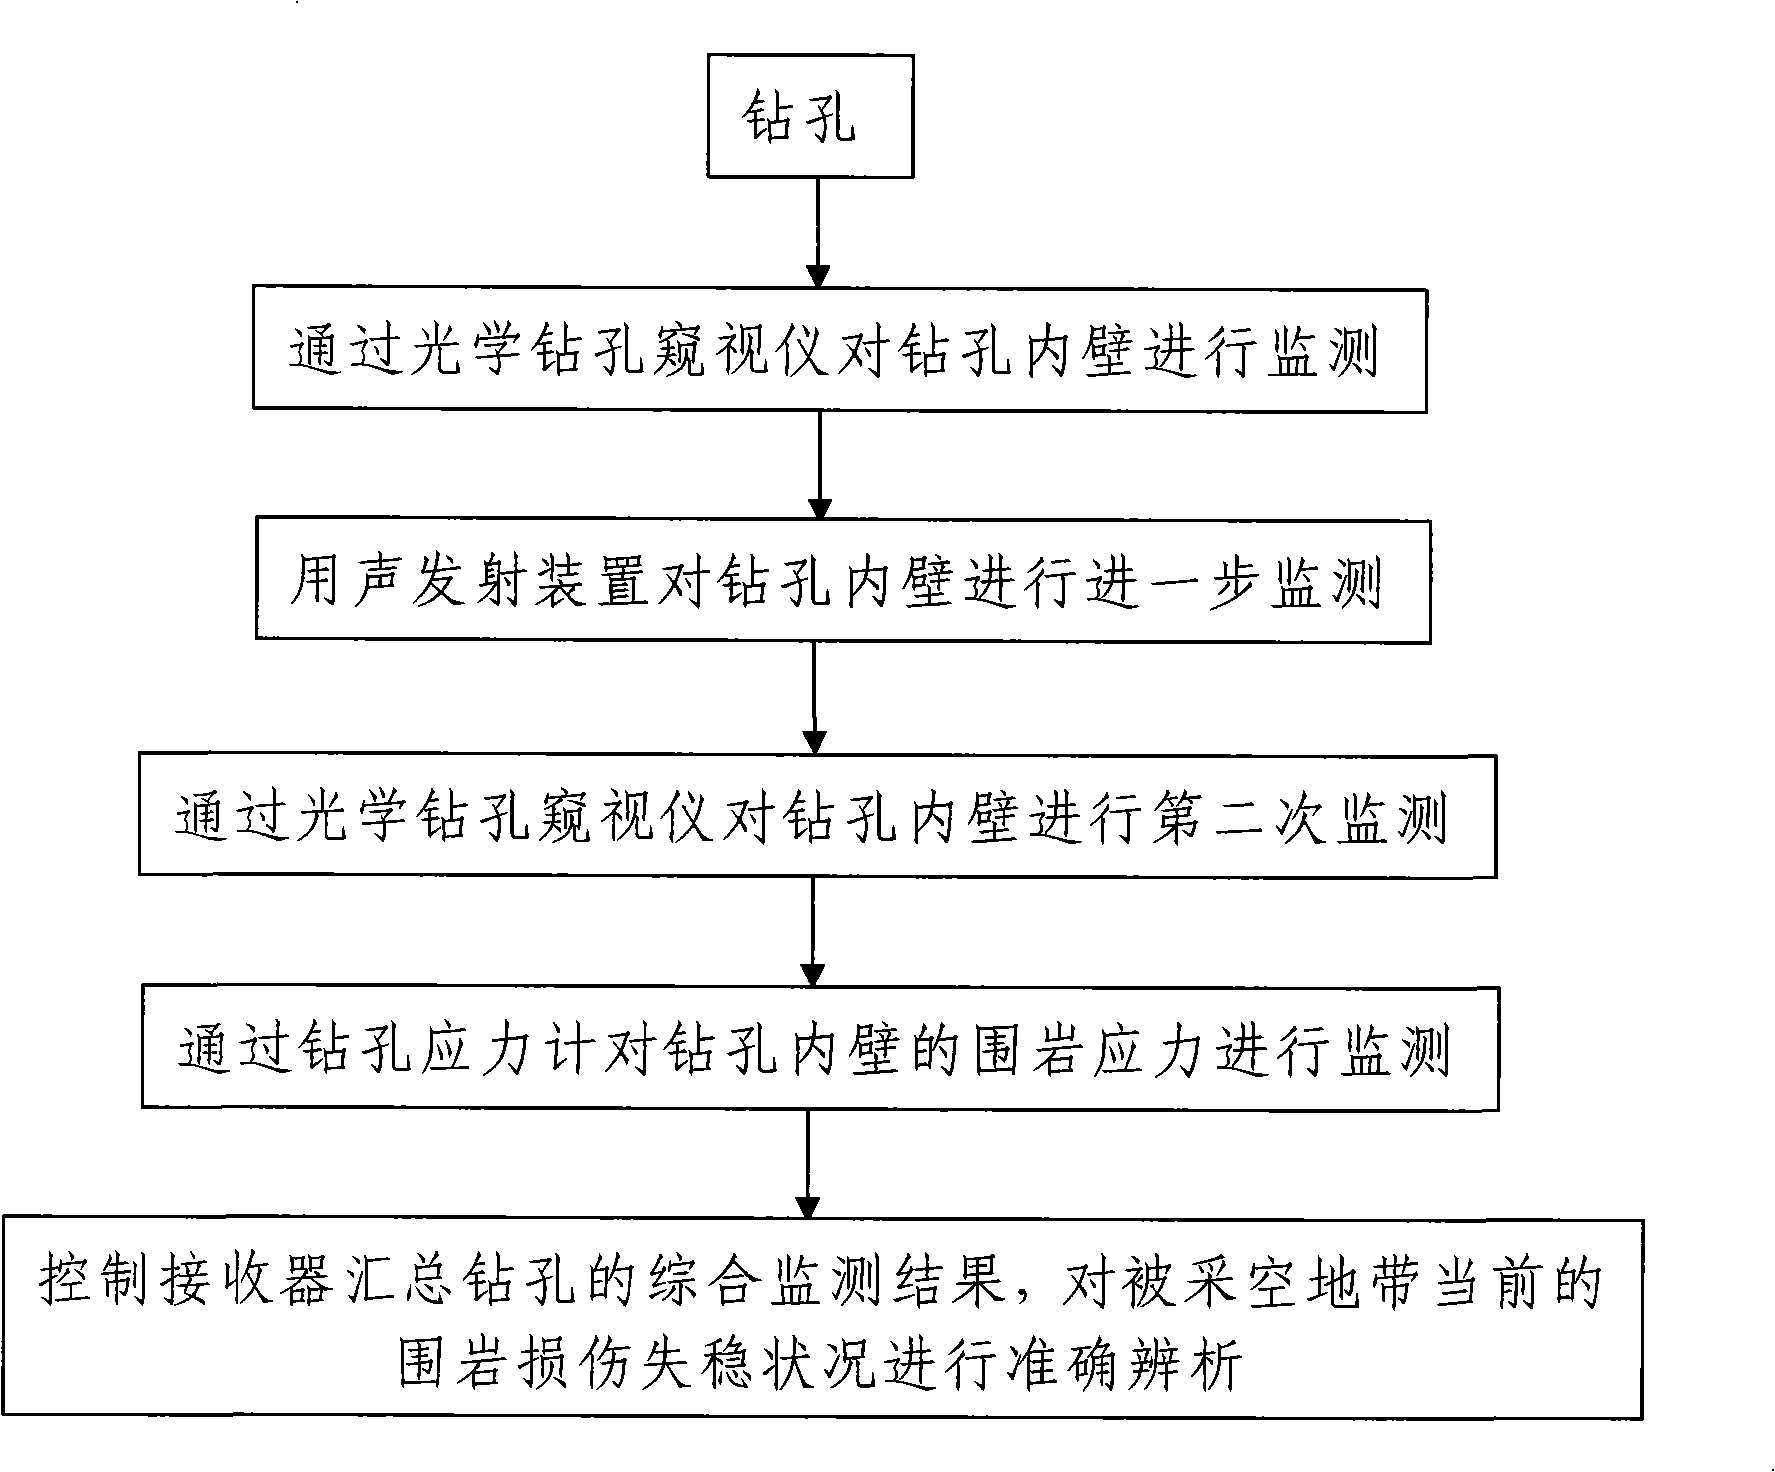 Wall rock destabilization acousto-optic-electric integrated monitoring system and monitoring method thereof